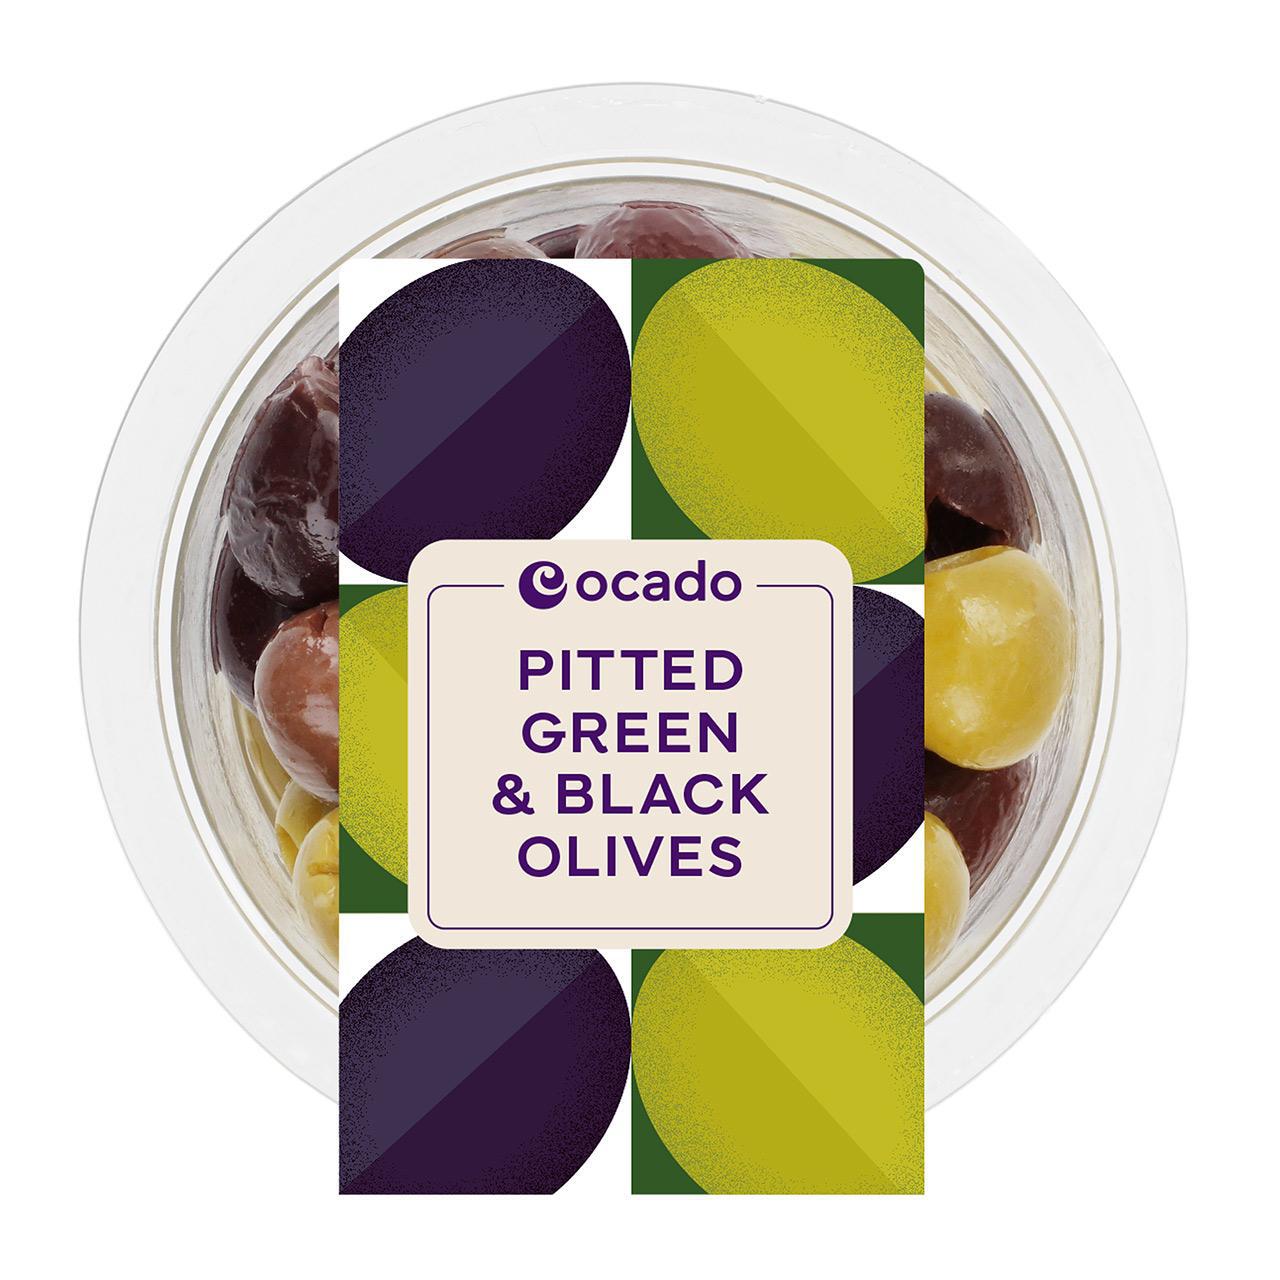 Ocado Pitted Green & Black Olives 120g